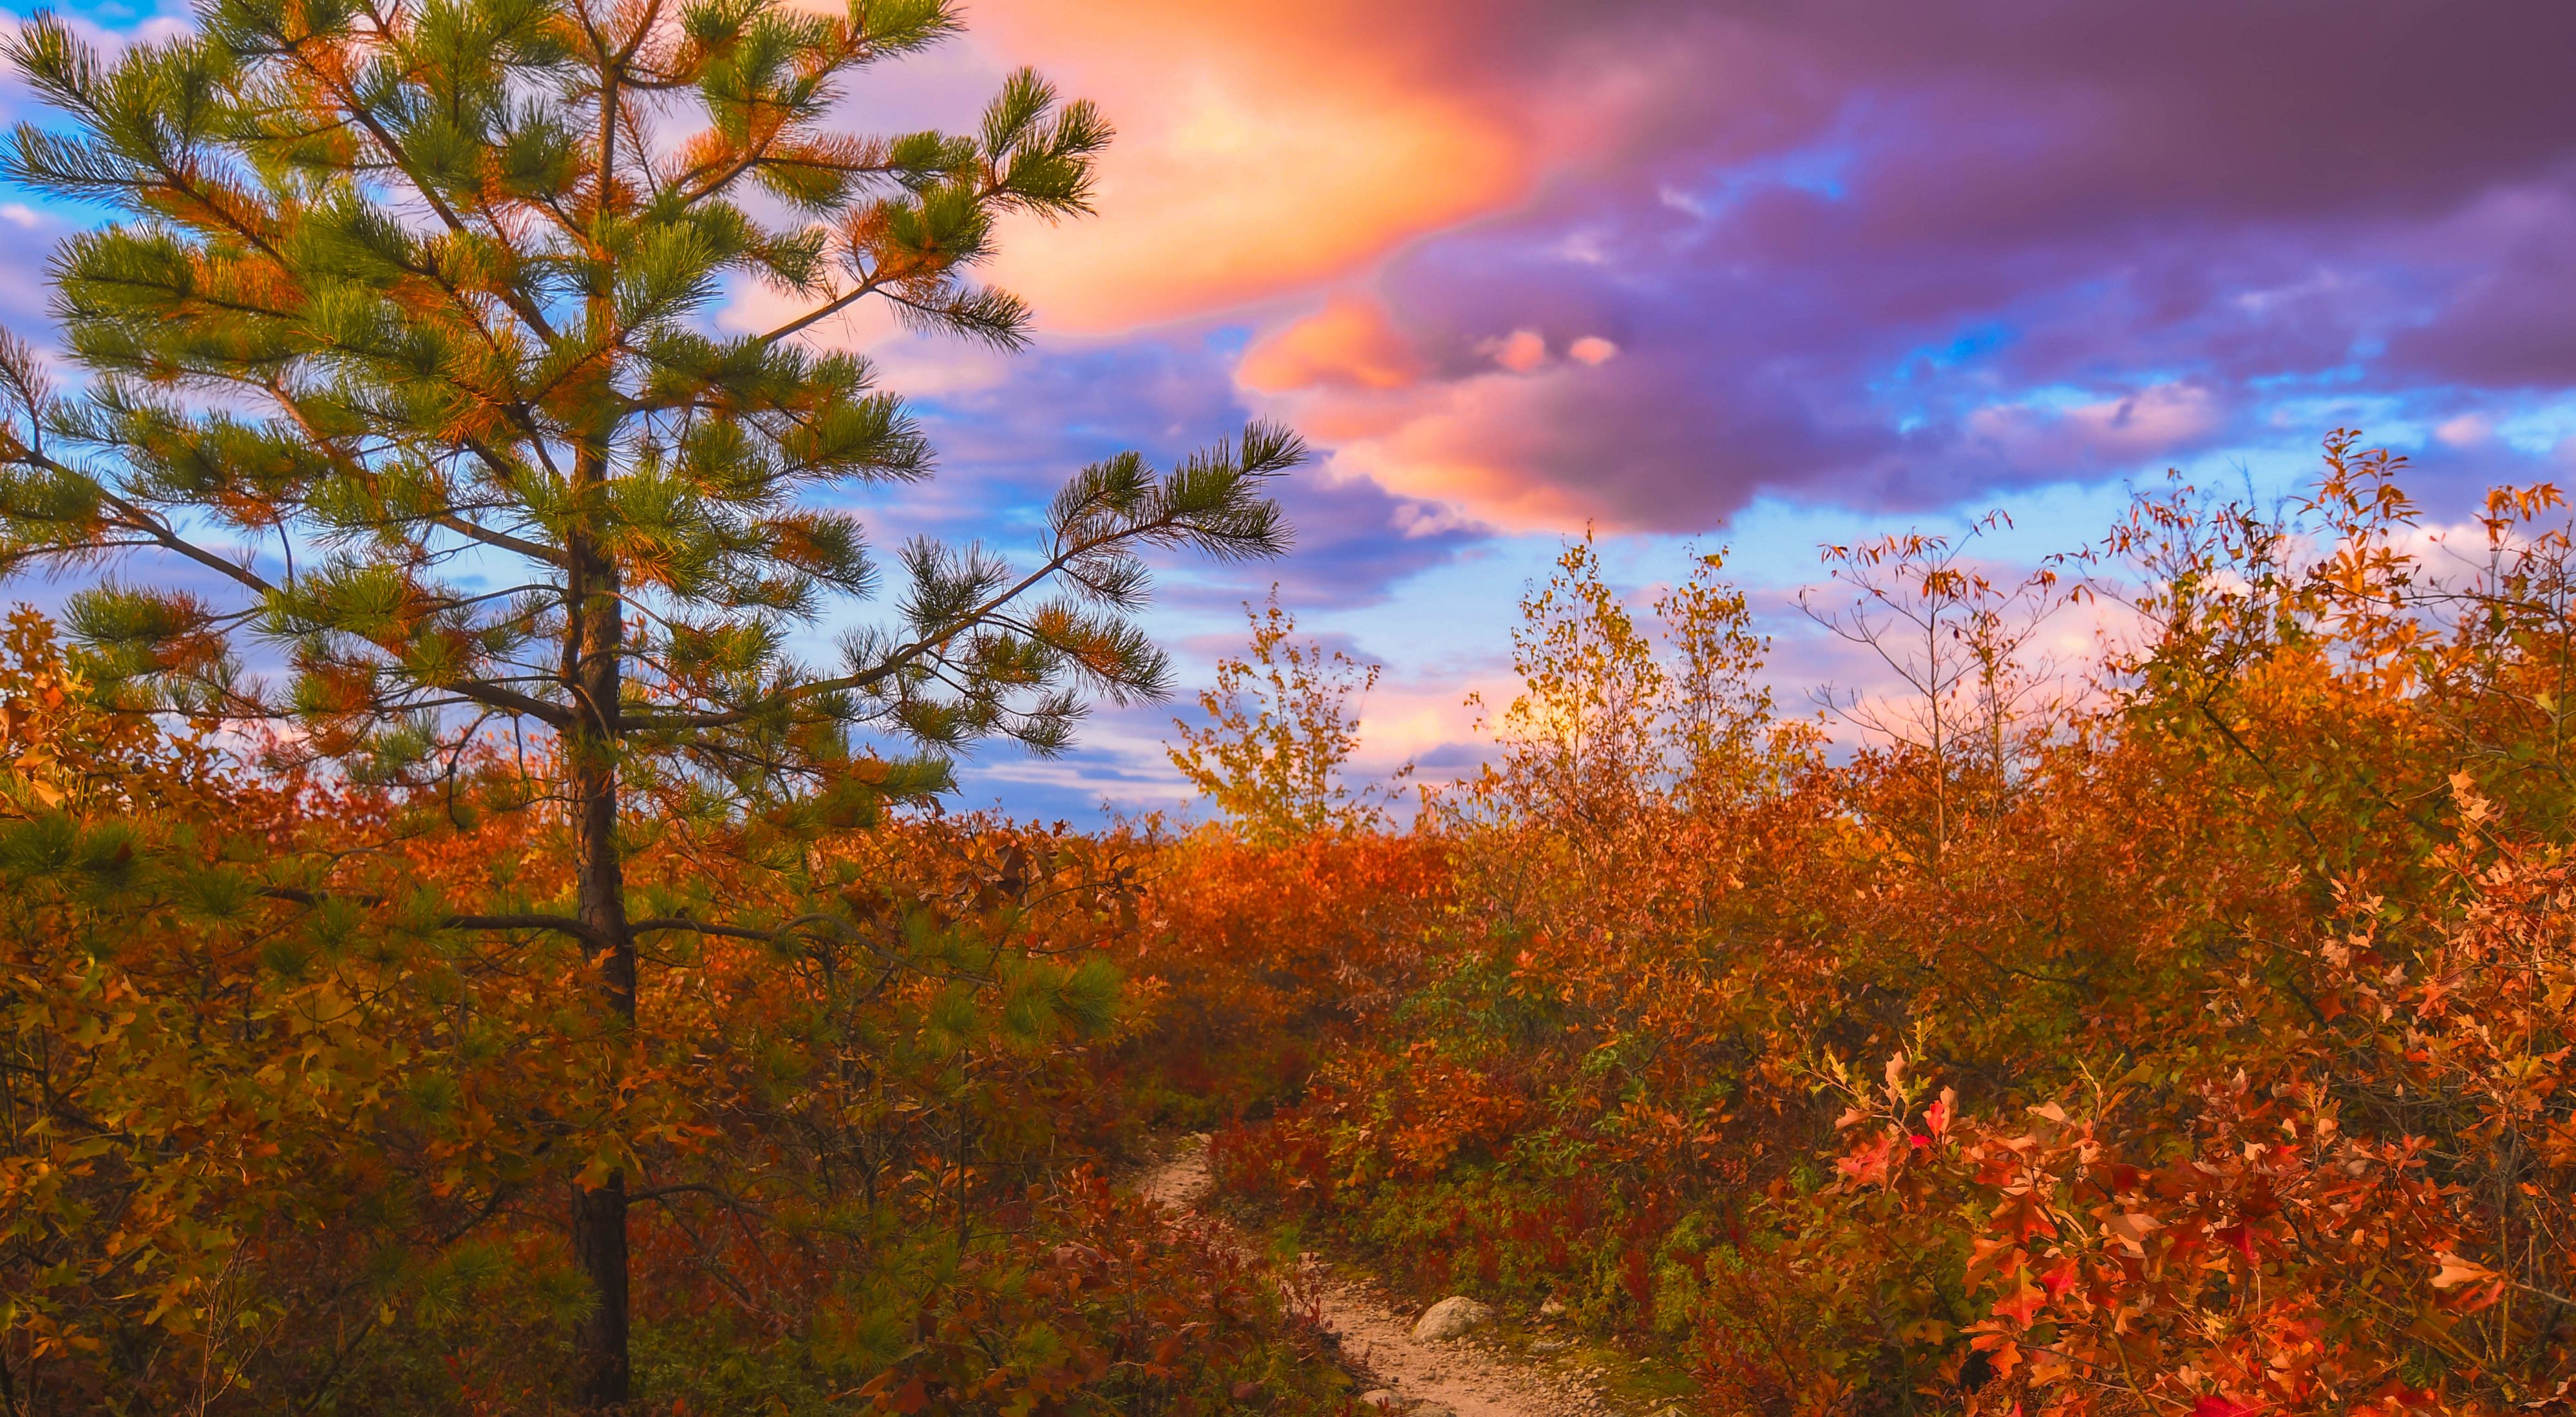 A view of a forest with a purple and blue sky featuring pink clouds in the background.